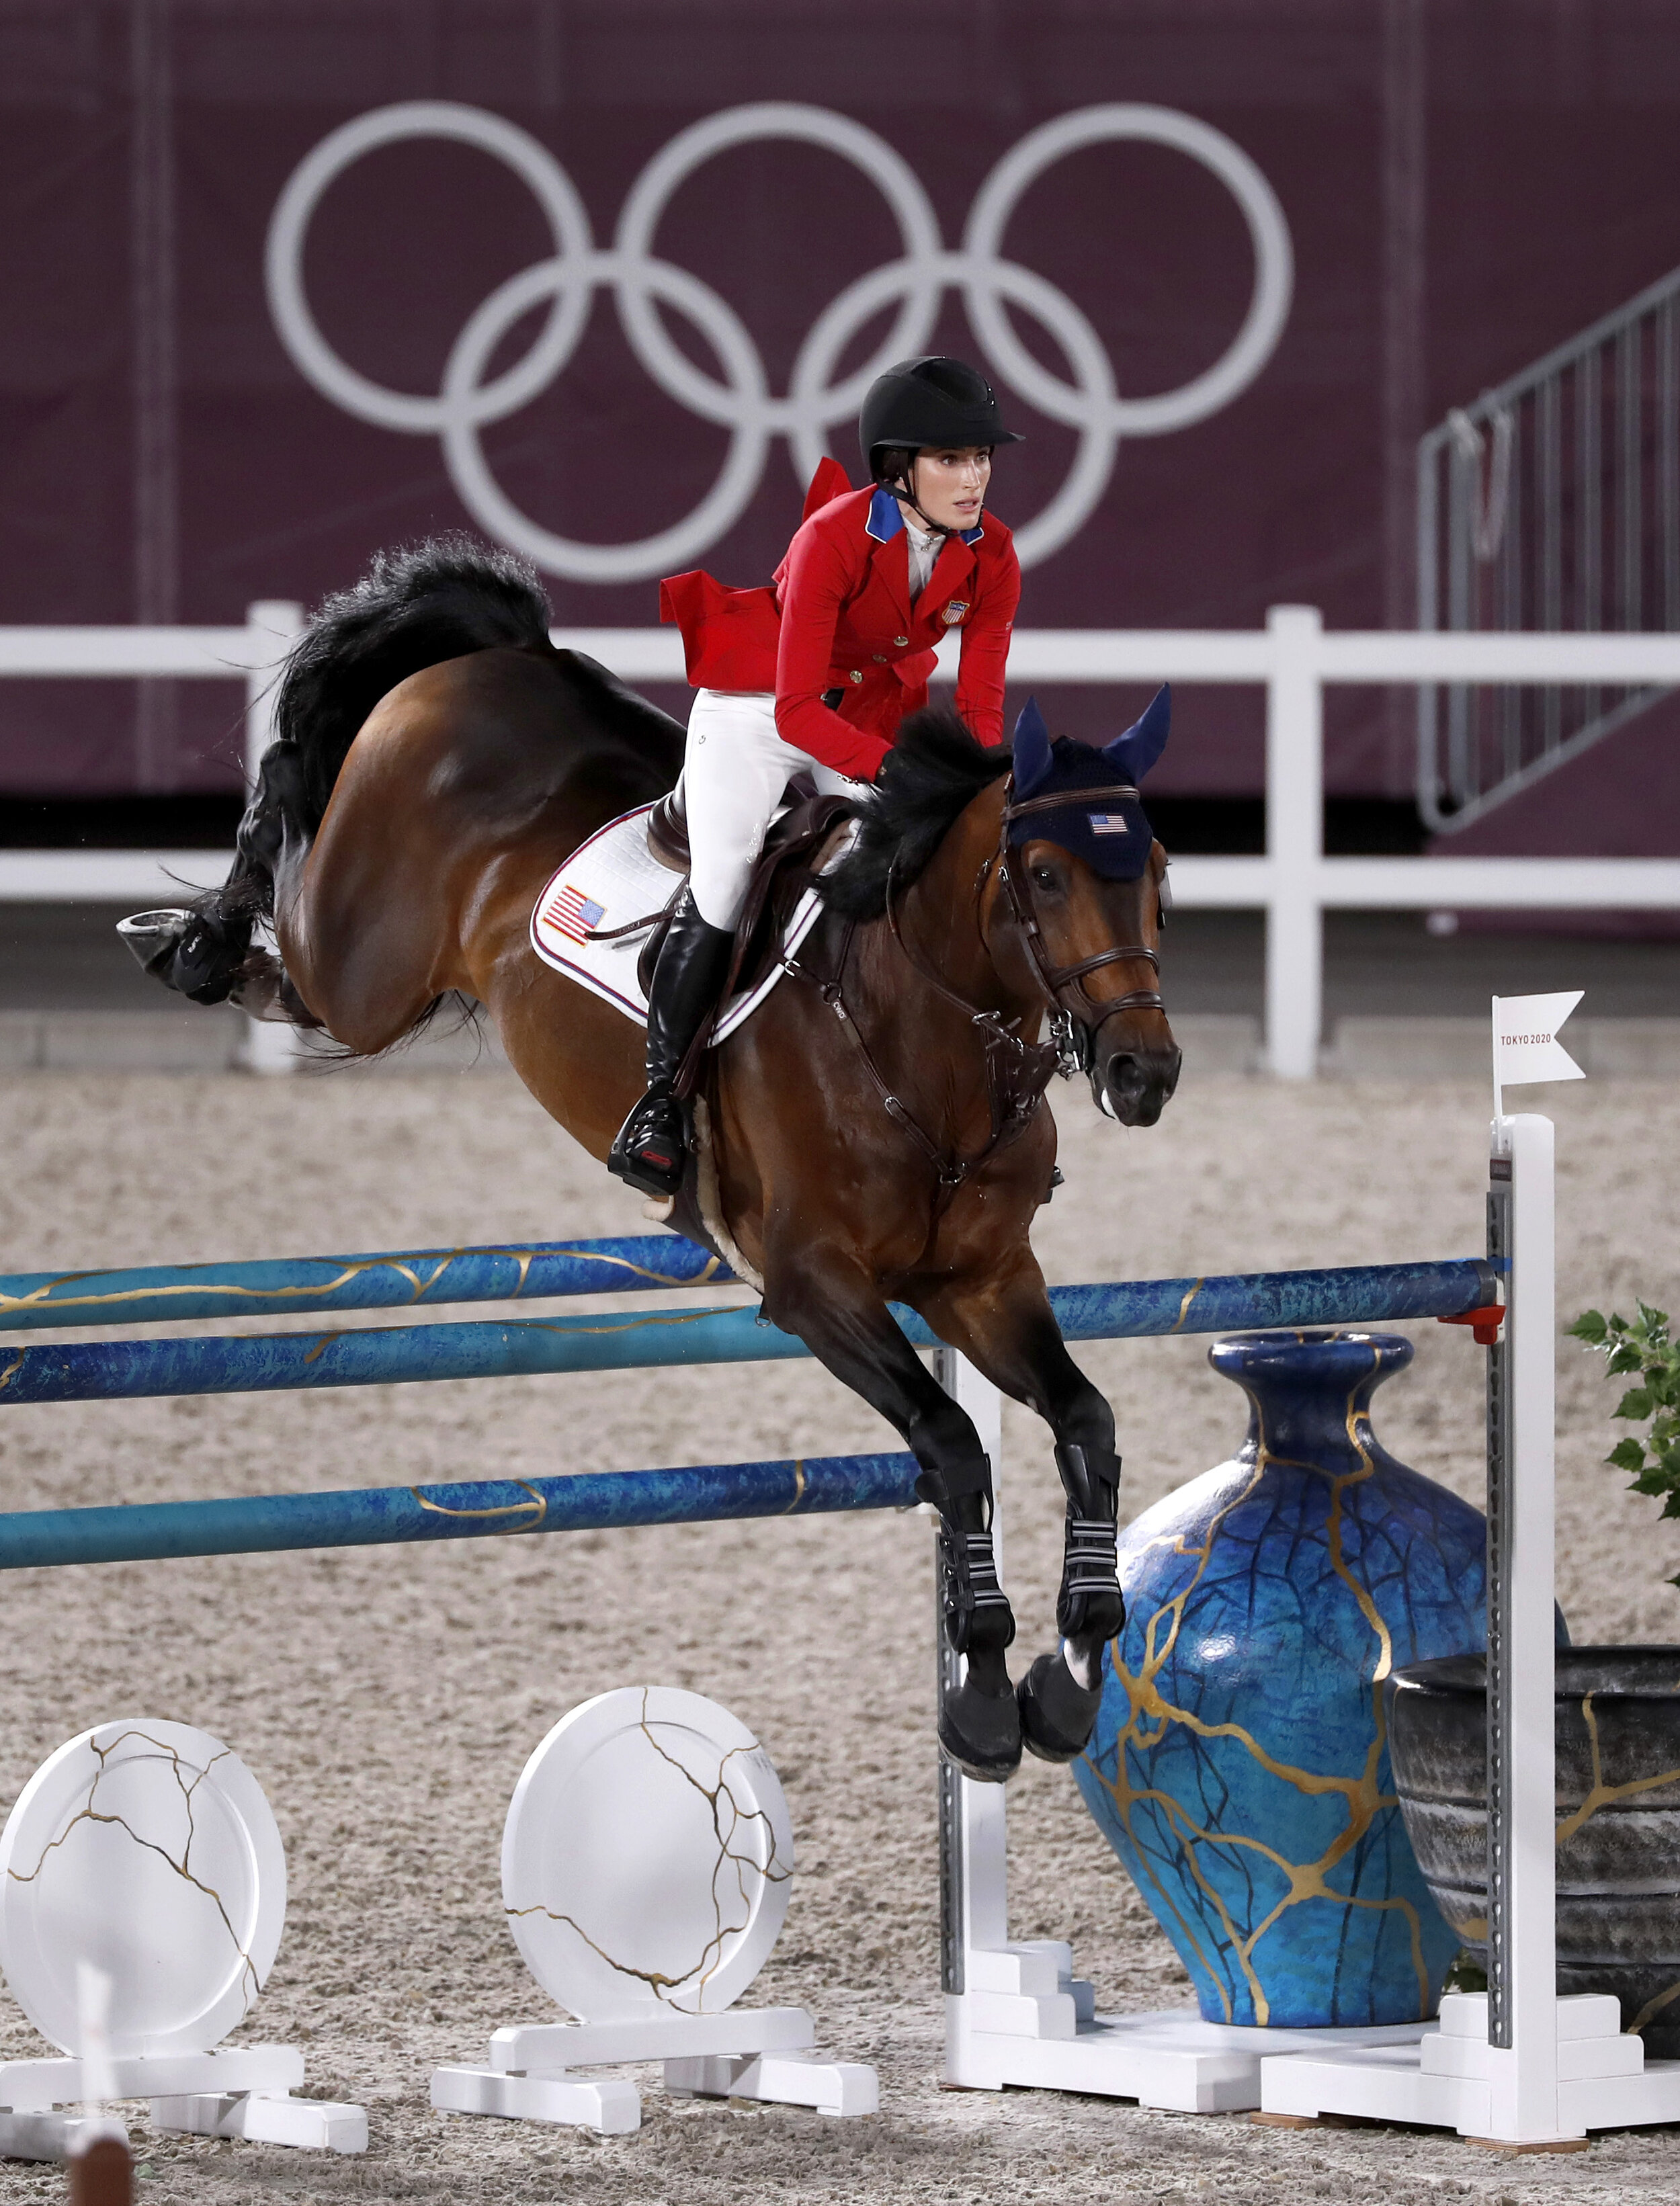  Jessica Springsteen clears a gate with her horse Don Juan Van De Donkhoeve at the Tokyo Olympics. 